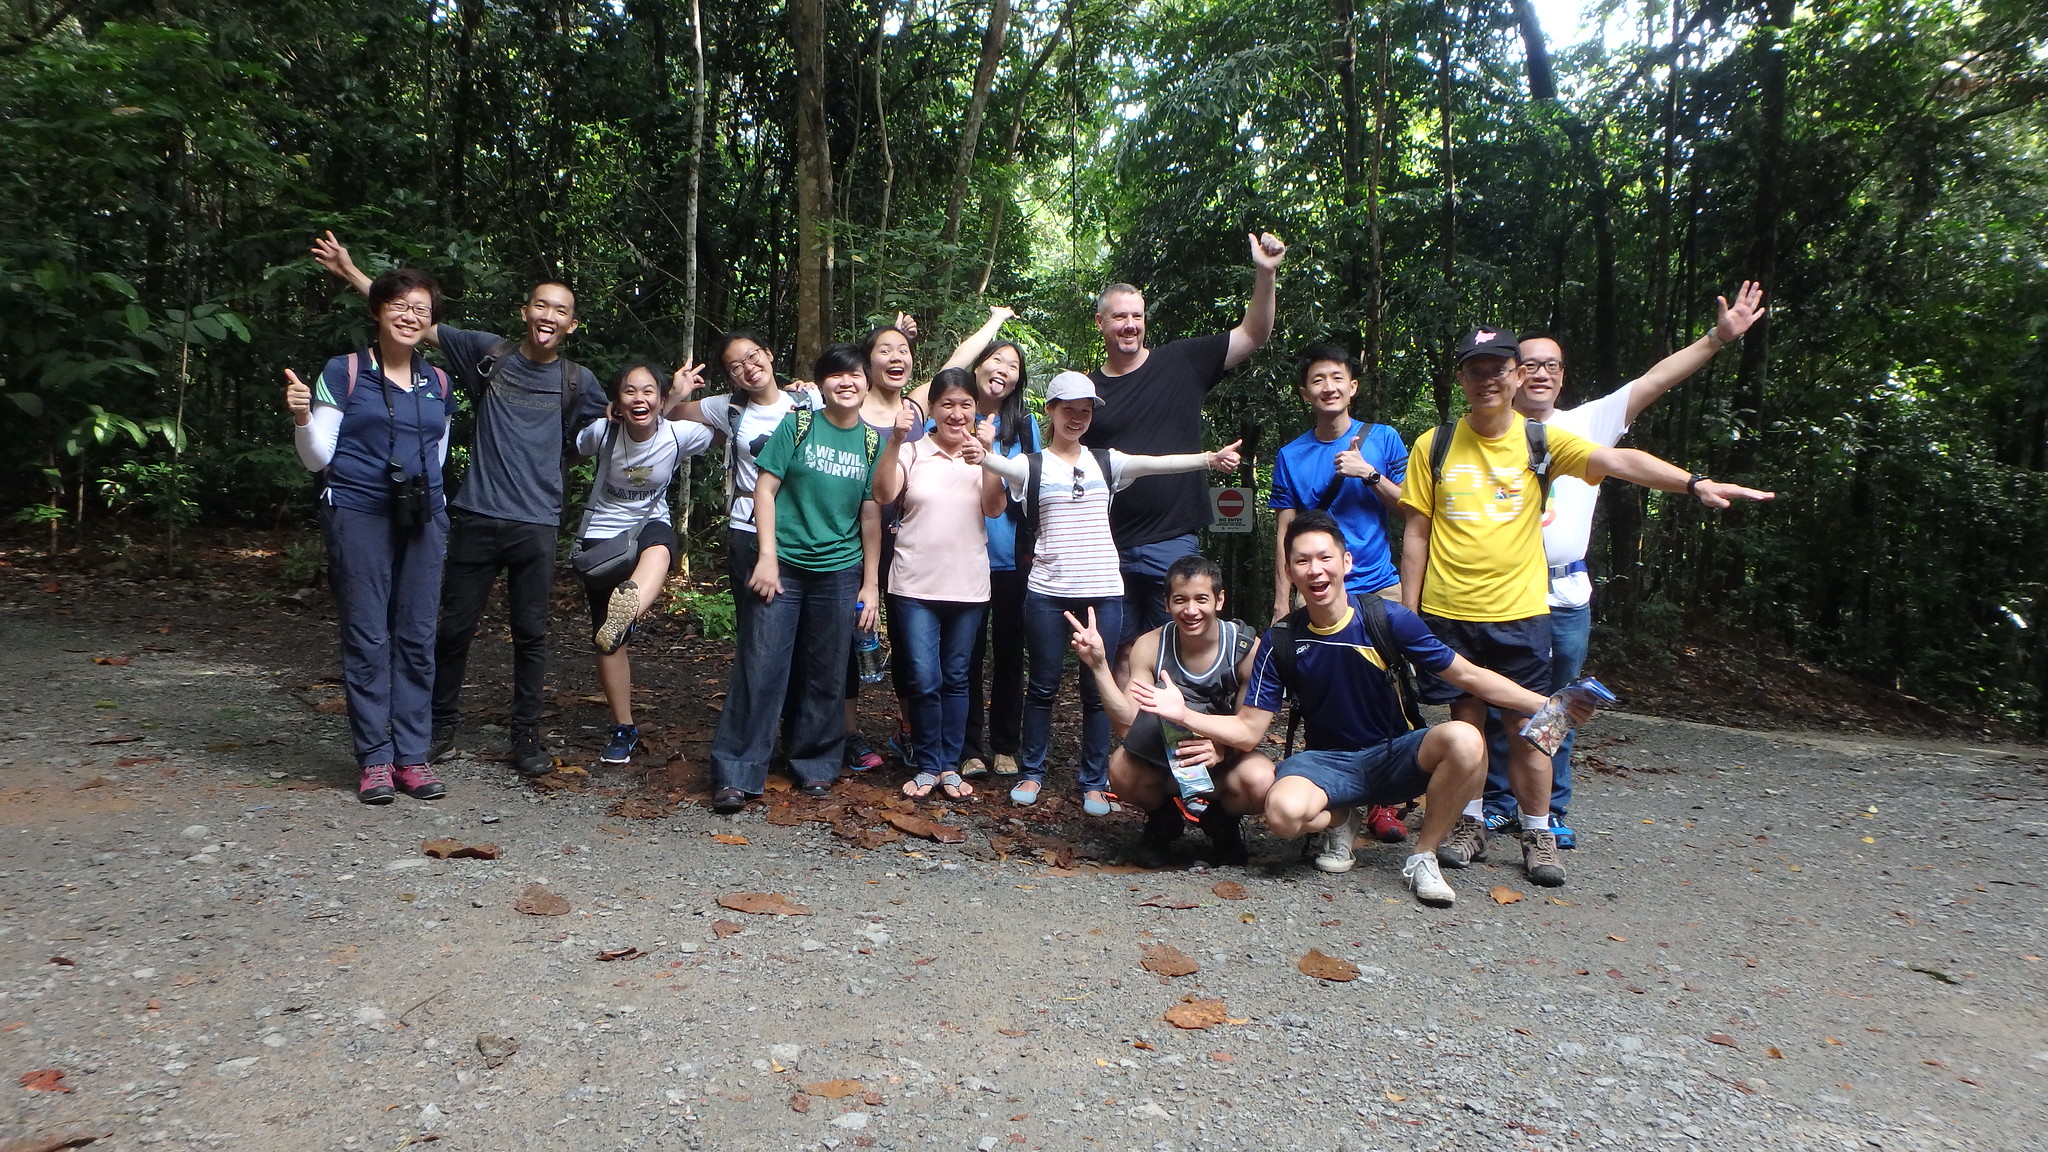 Monthly free guided walk at Chek Jawa with the Naked Hermit Crabs